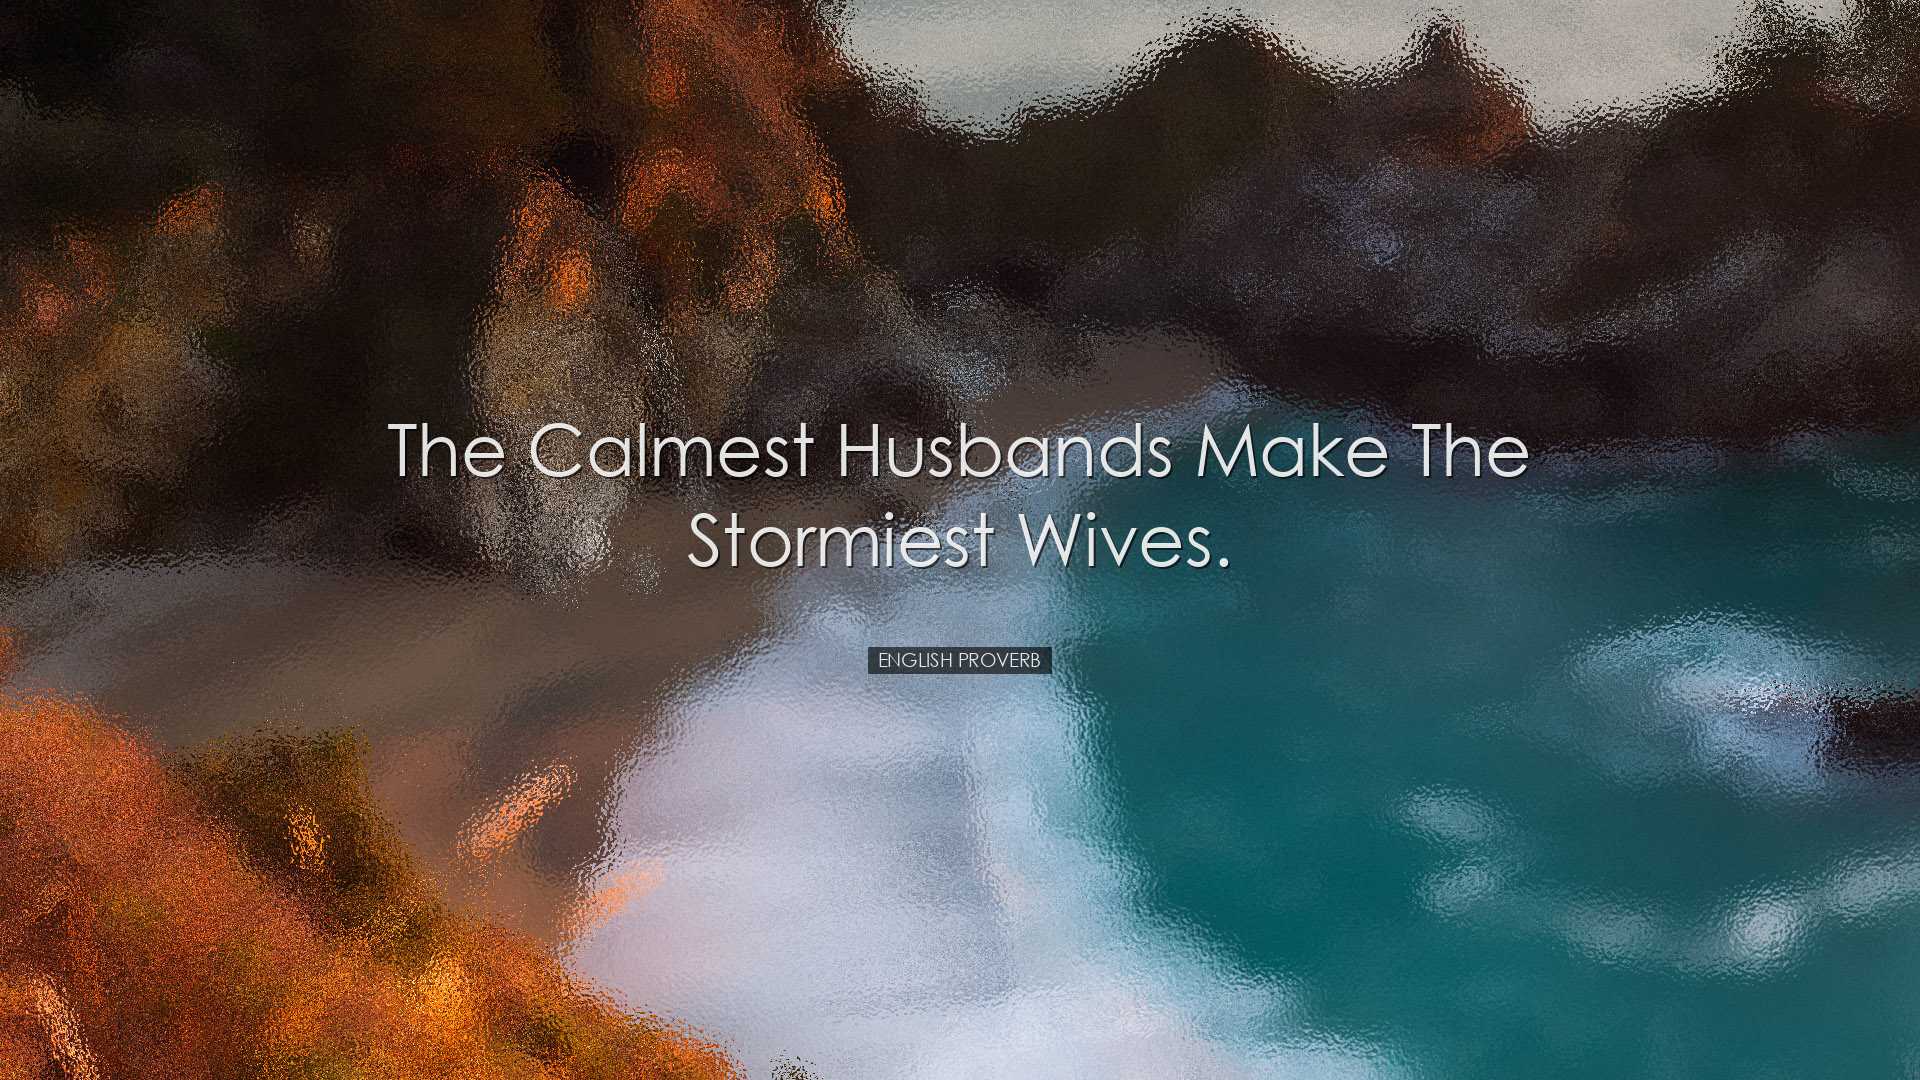 The calmest husbands make the stormiest wives. - English Proverb